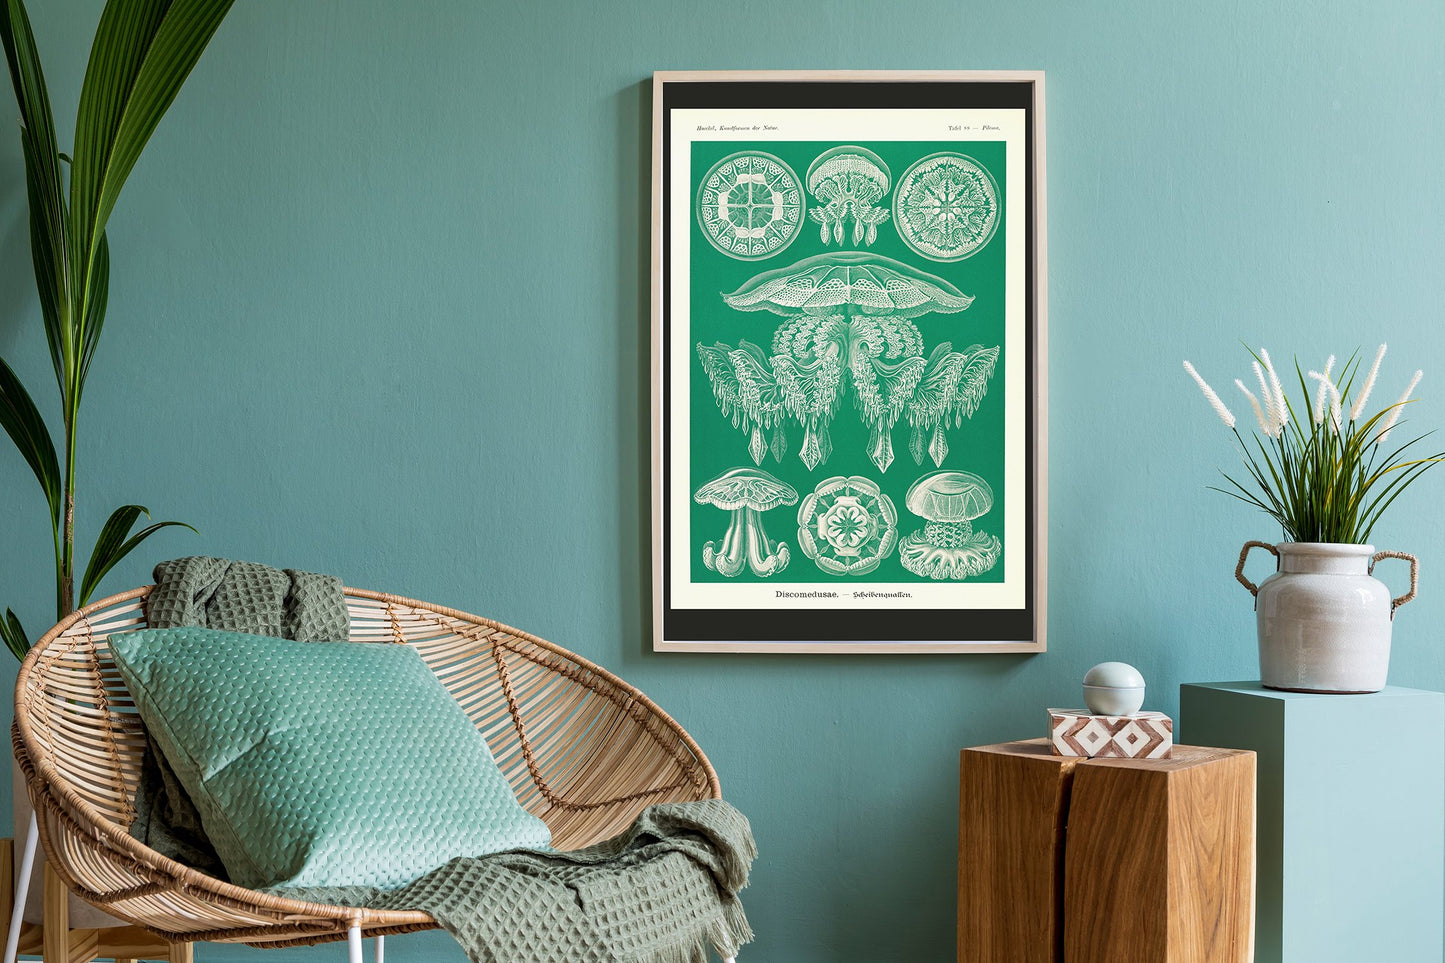 Discomedusae Green Jellyfish by Ernst Haeckel Poster with borders